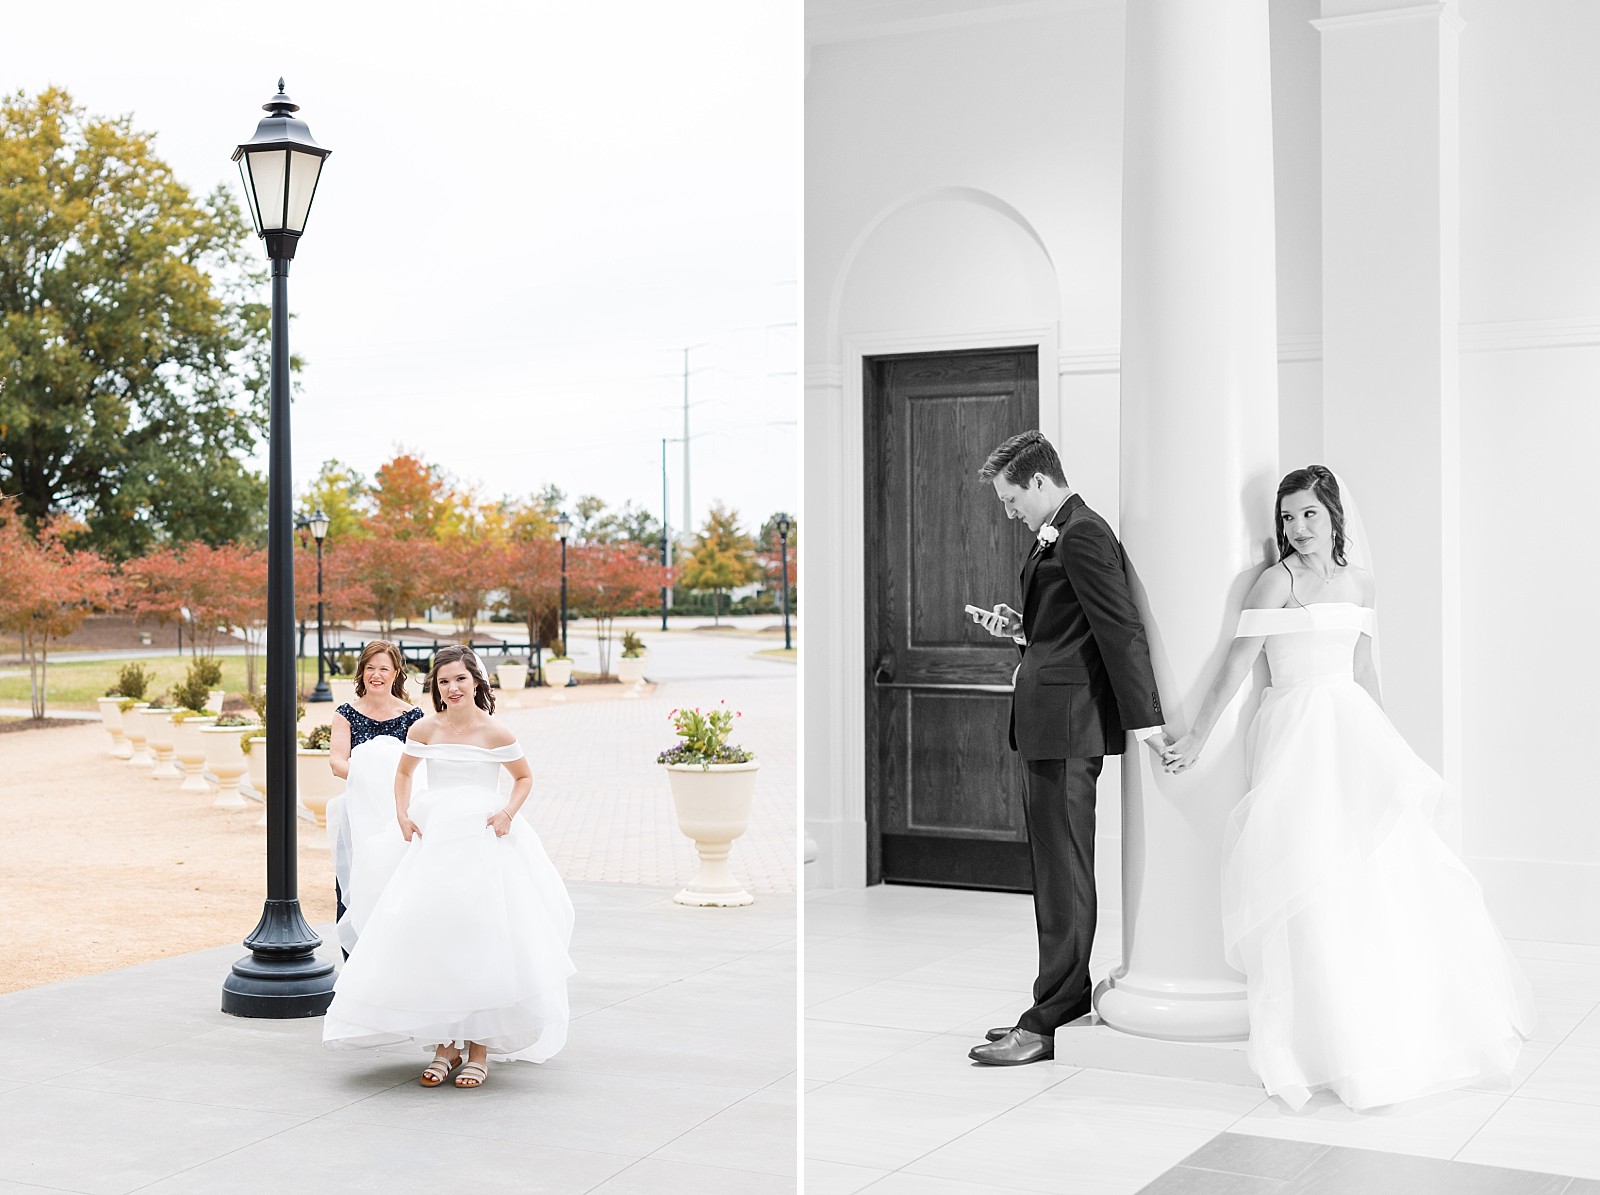 brides mother helping her walk into the church and bride and groom steeling a moment before the ceremony  | Fall Wedding at The Meadows in Raleigh | Raleigh NC Wedding Photographer